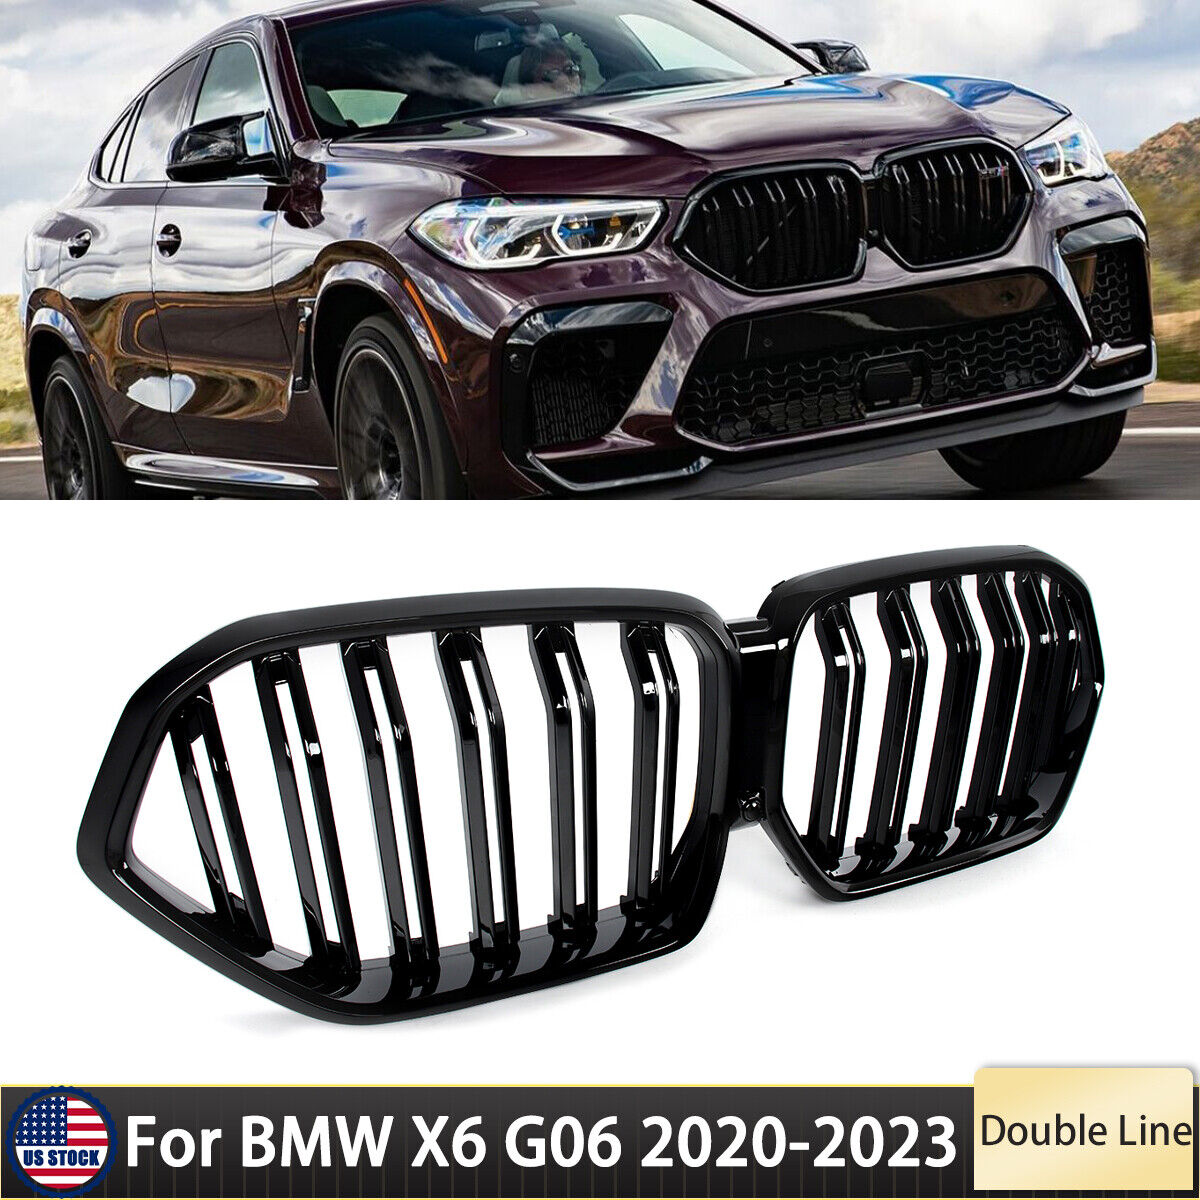 Gloss Black Dual Slat Front Kidney Grill Grille For BMW X6 G06 2020-2023